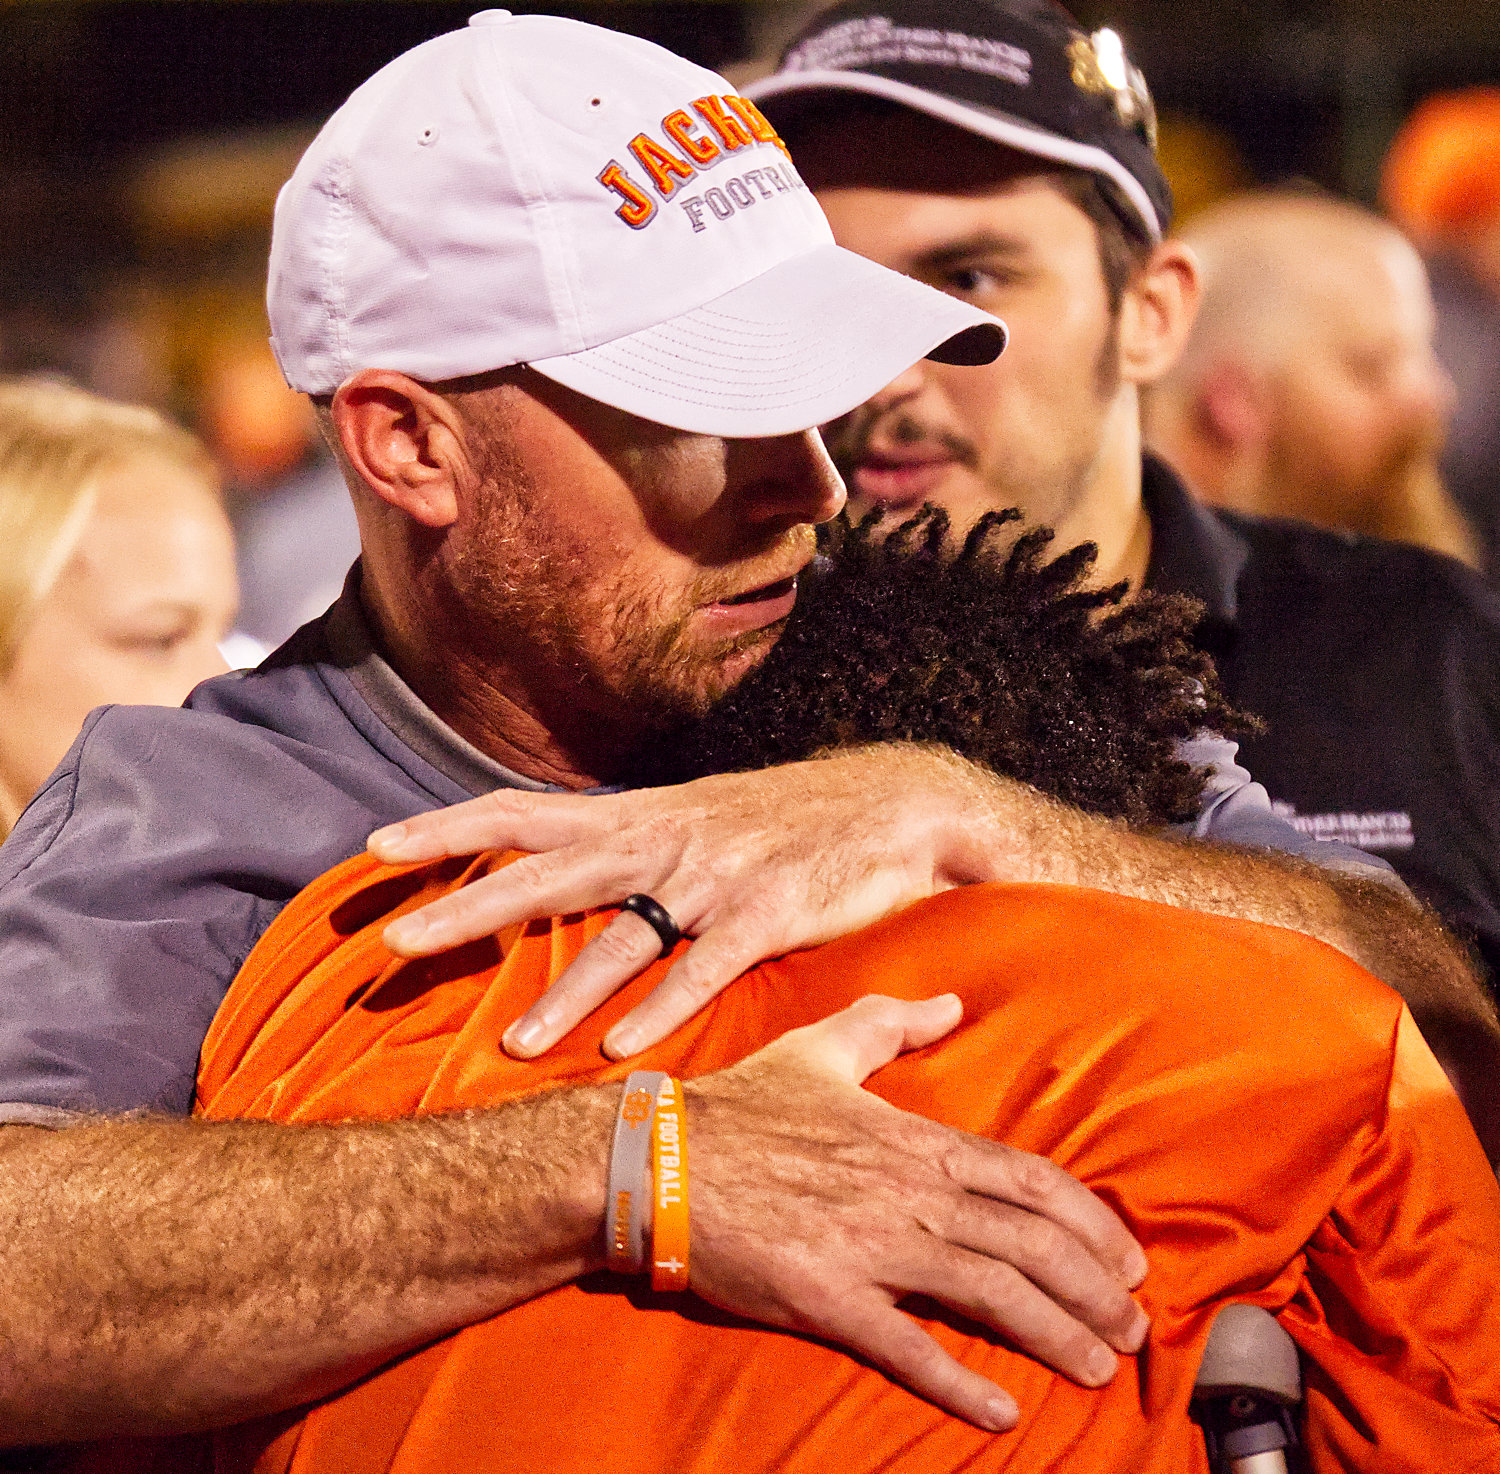 Coach Luke Blackwell embraces Montrell Williams after the game in Big Sandy Friday night in which Williams injured his knee. Blackwell expressed his admiration for Williams as an athlete and young man, saying he does things the right way.